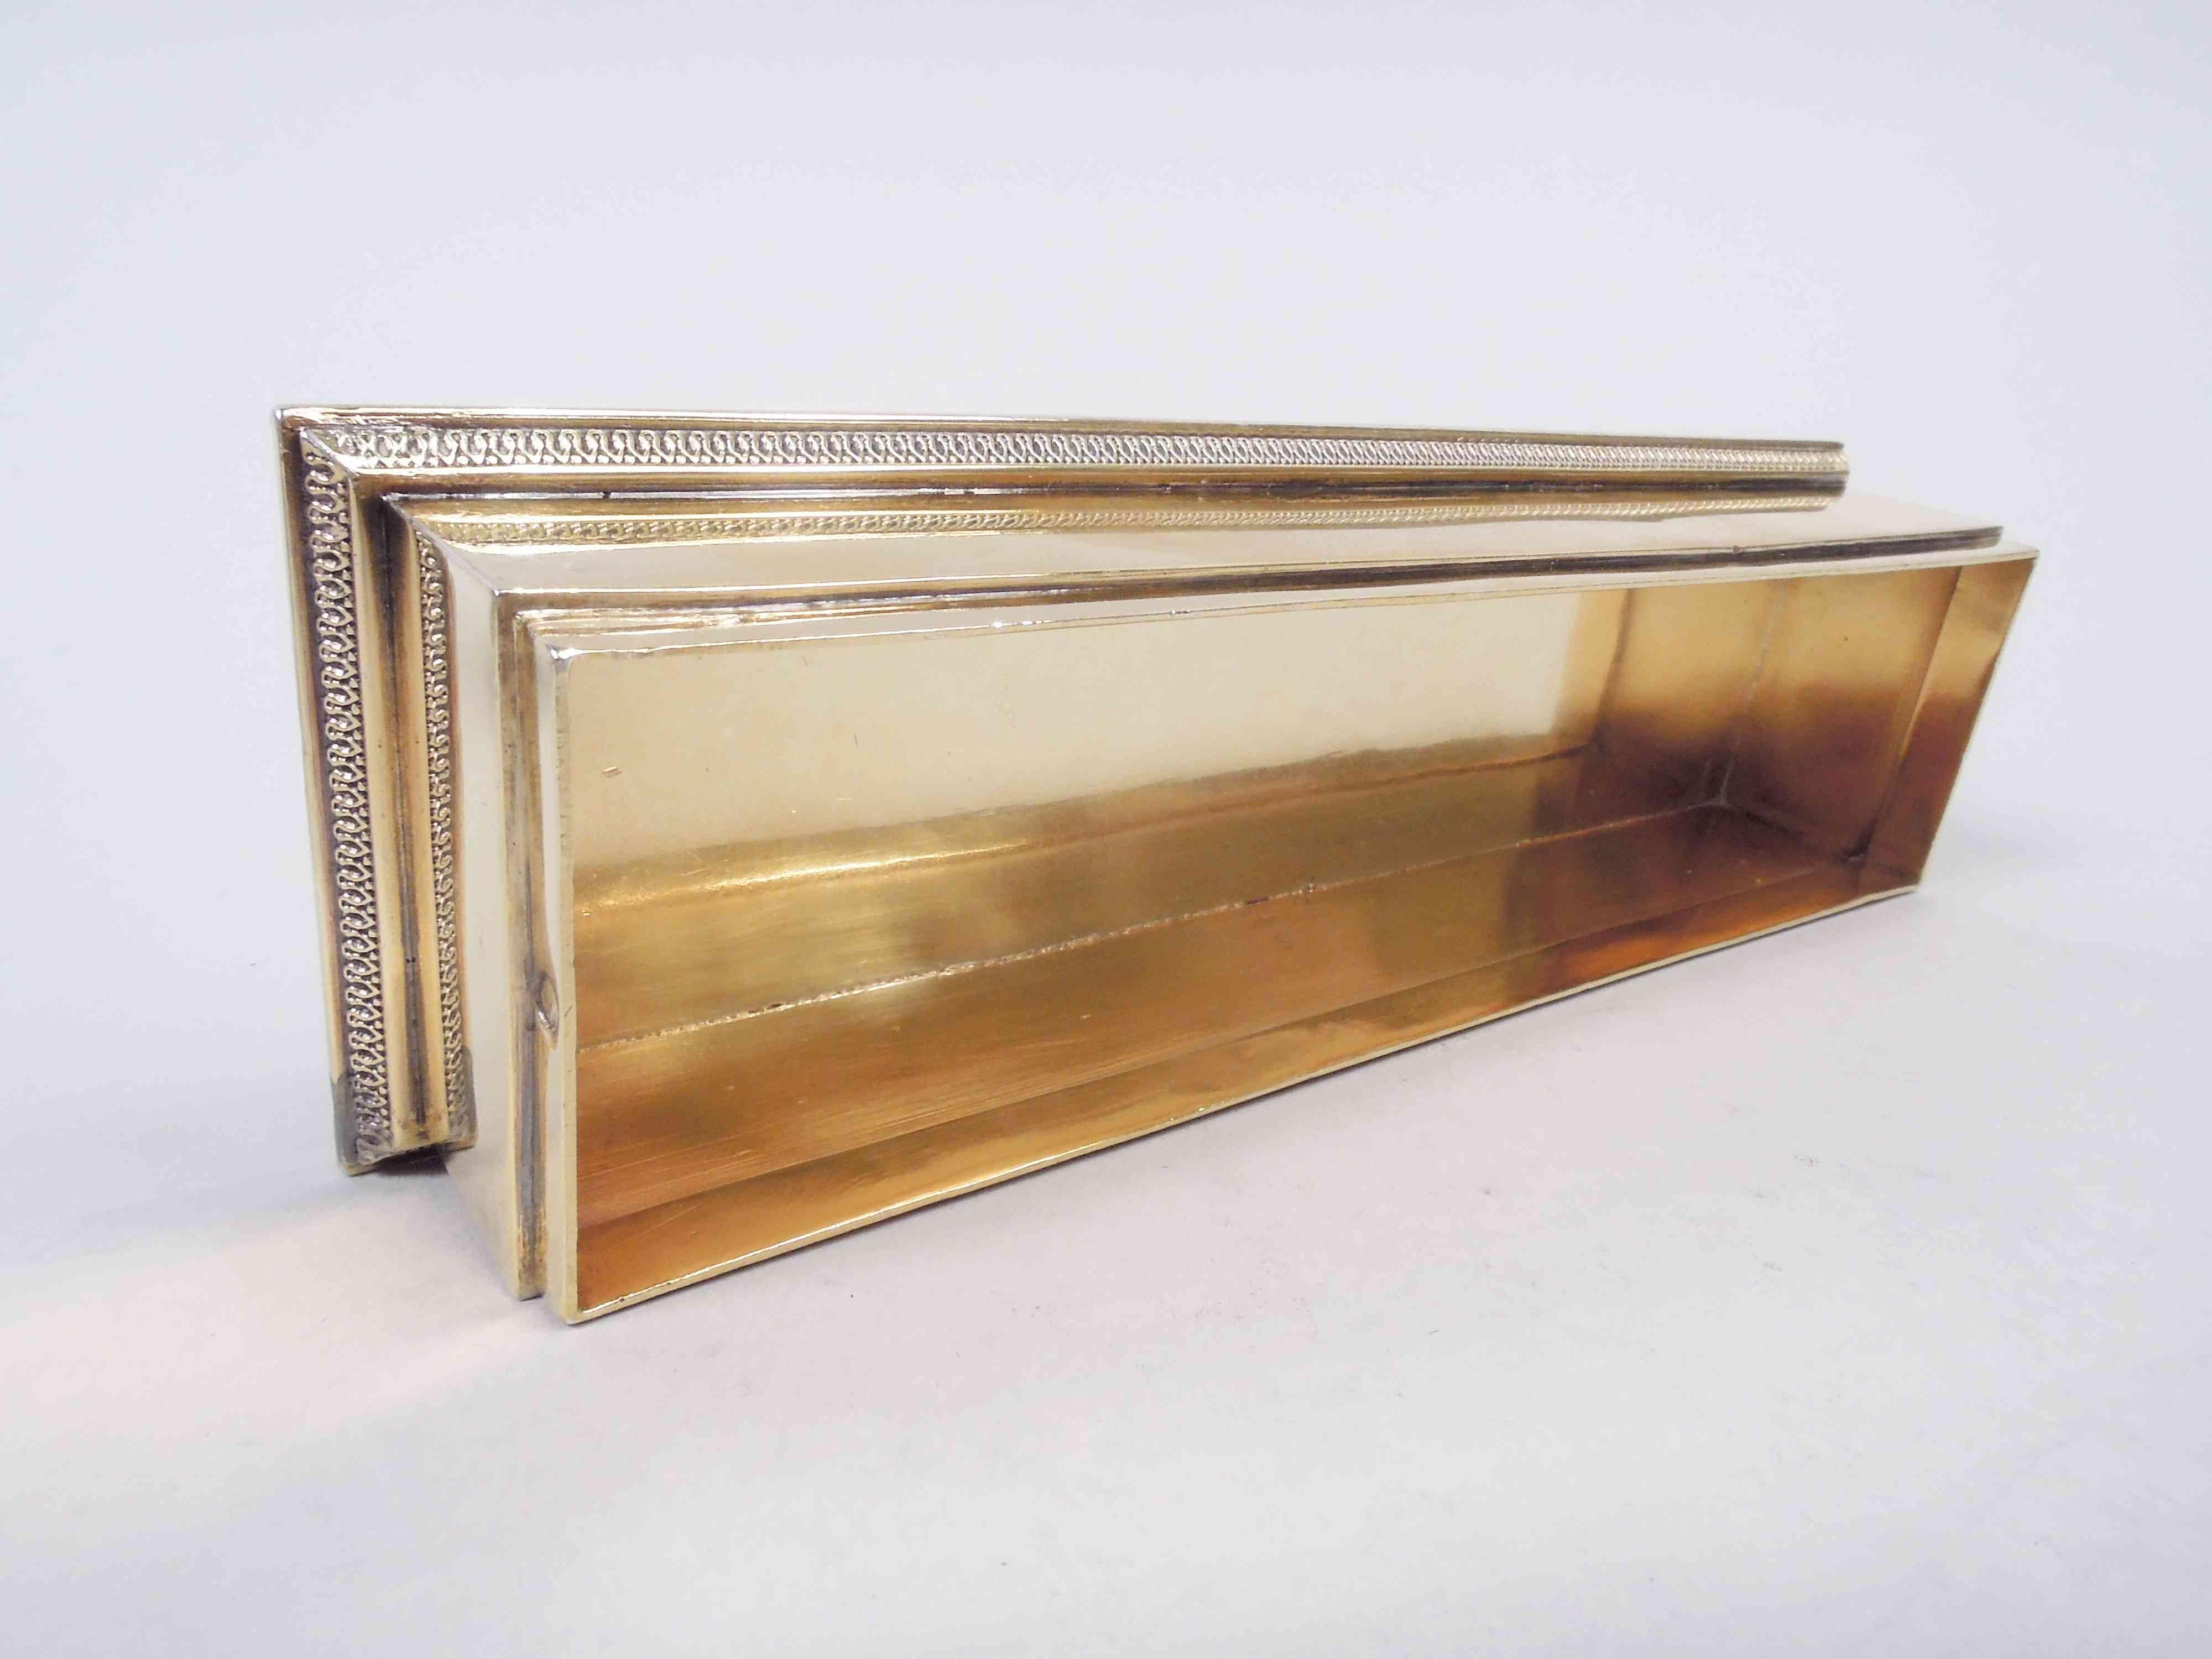 Odiot French Restauration Return of the Bourbons Silver Gilt Box For Sale 6